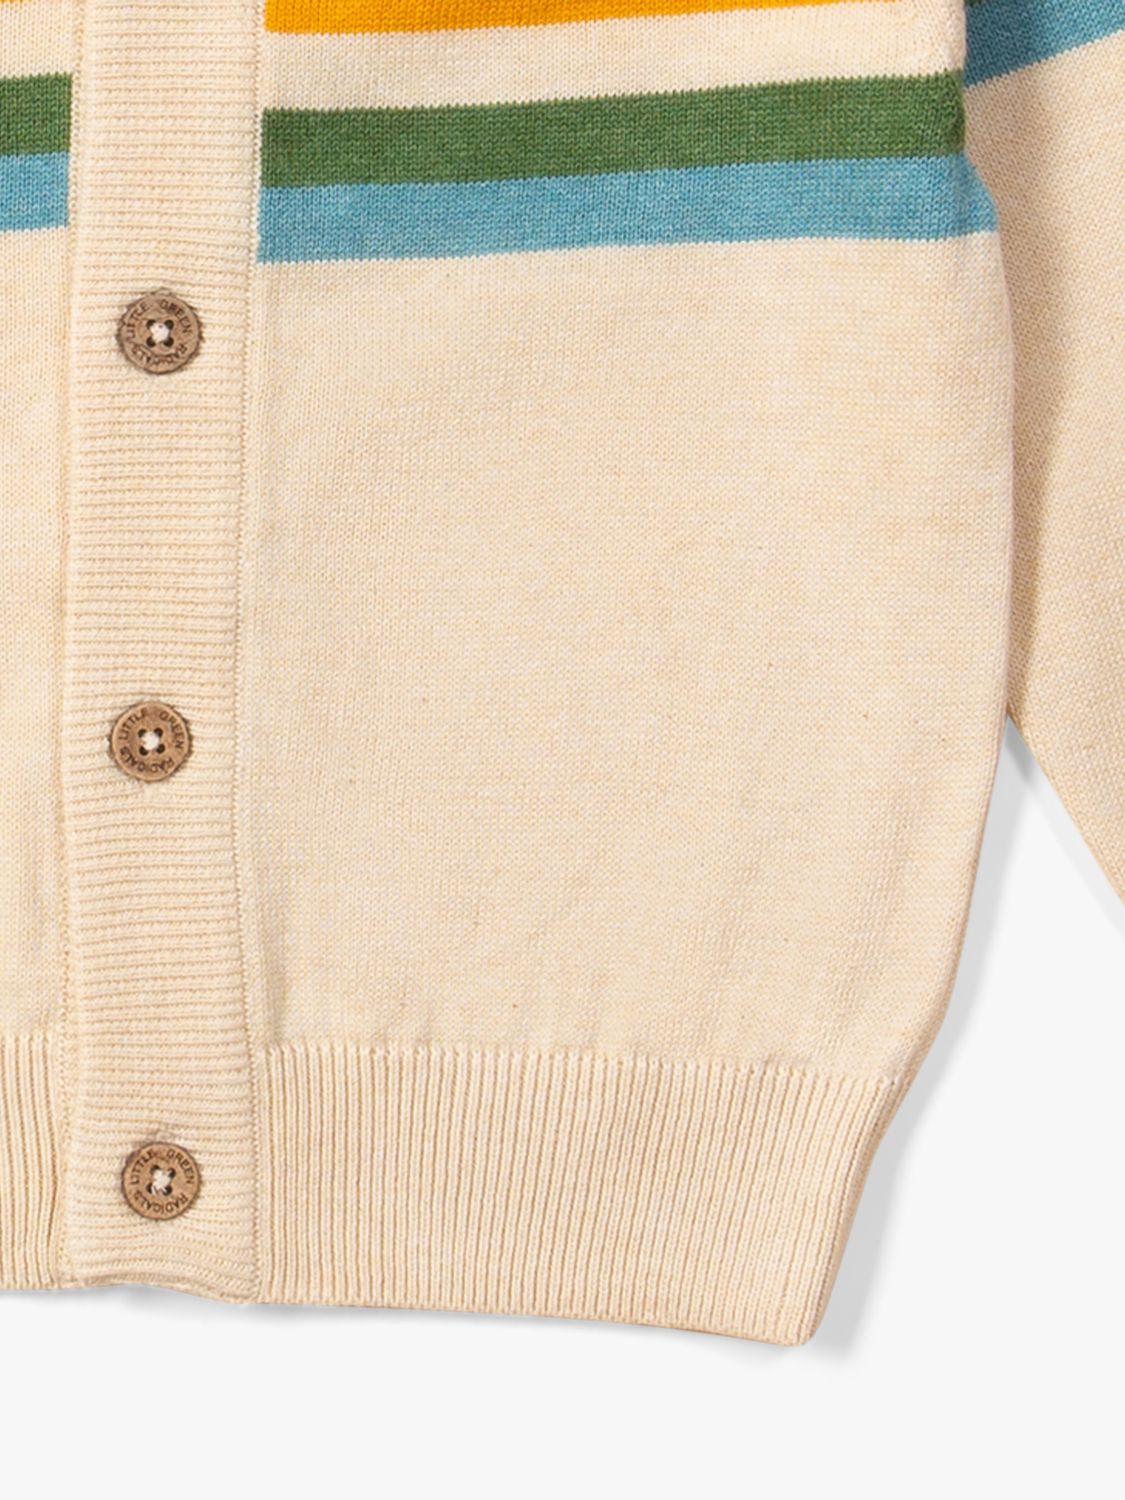 Little Green Radicals Baby Organic Cotton From One To Another Rainbow Stripe Knit Cardigan, Oatmeal, 4-5 years